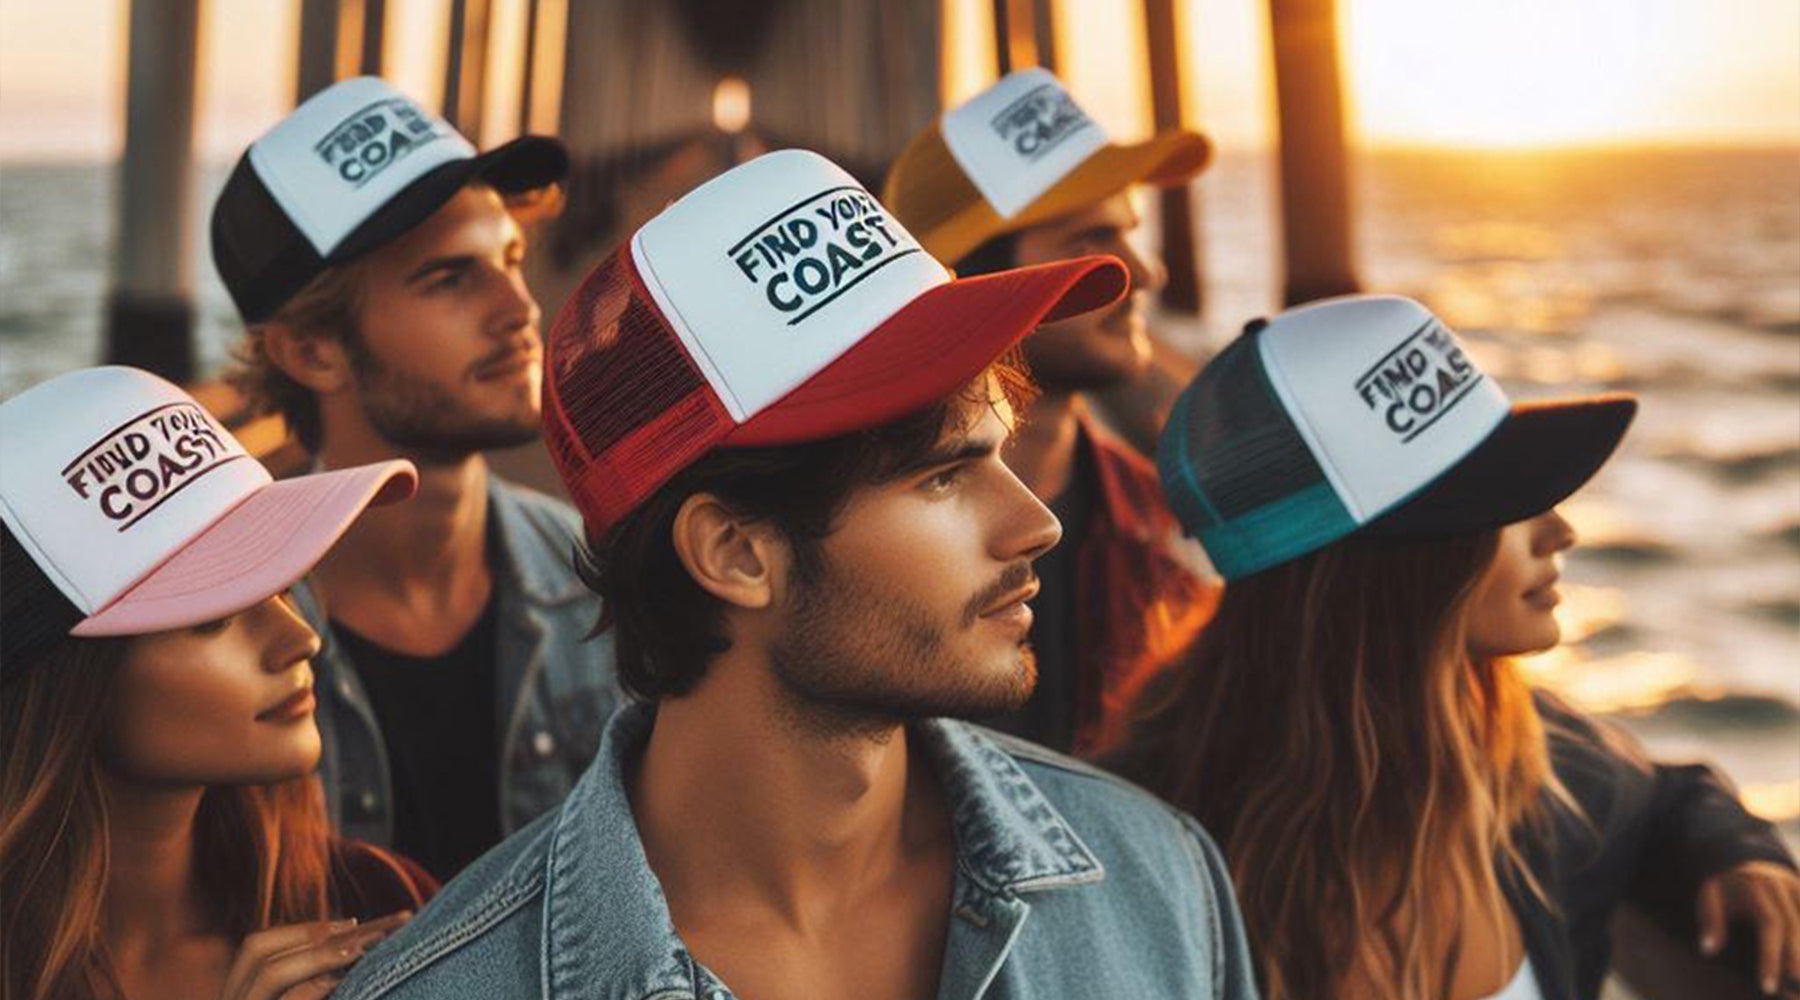 Find Your Coast hats